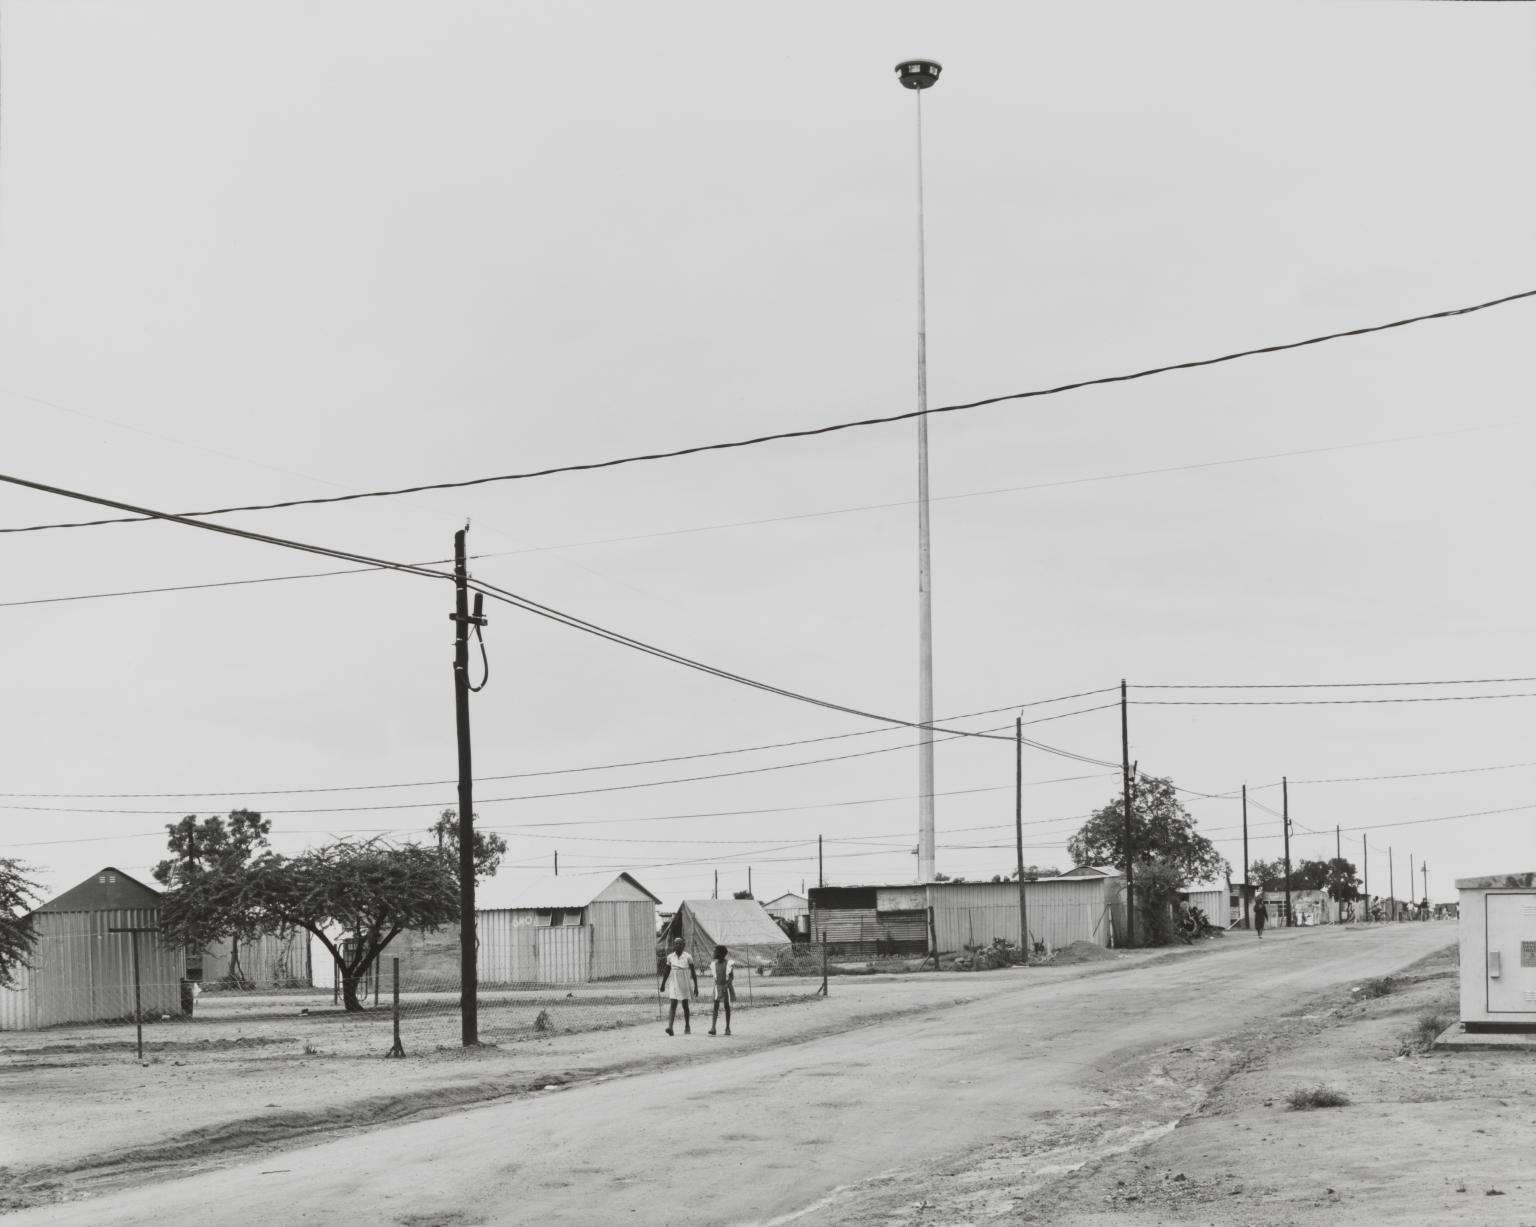 P80497: The place to which the government wanted the people of Oukasie to move. Letlhabile Removal Camp, Transvaal. 30 November 1986